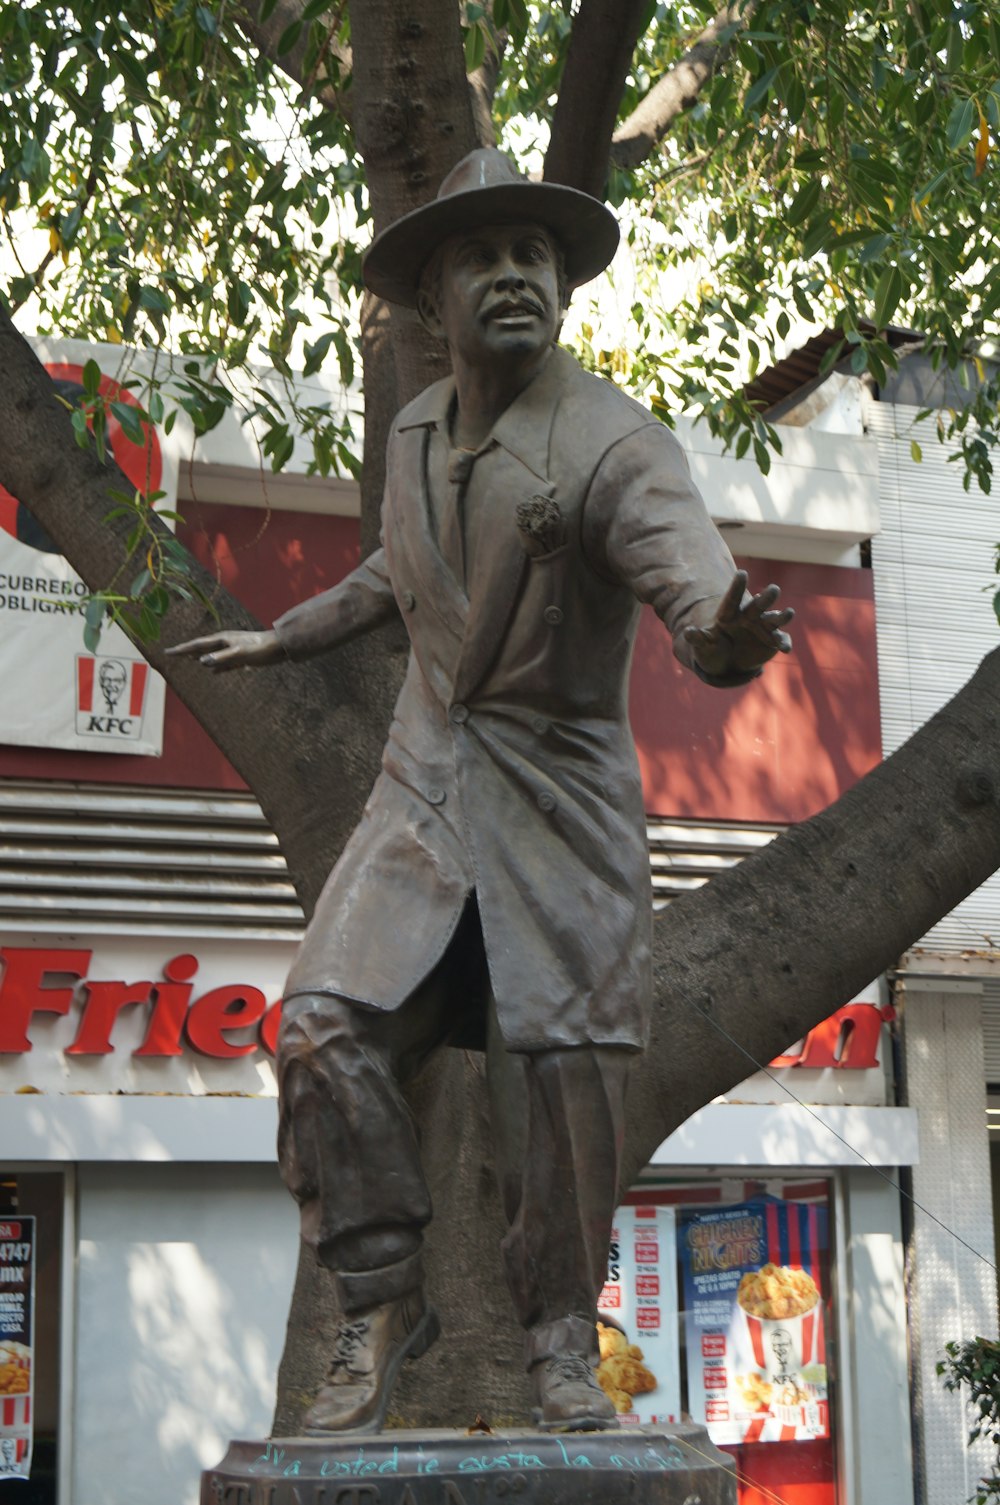 a statue of a man in a suit and hat